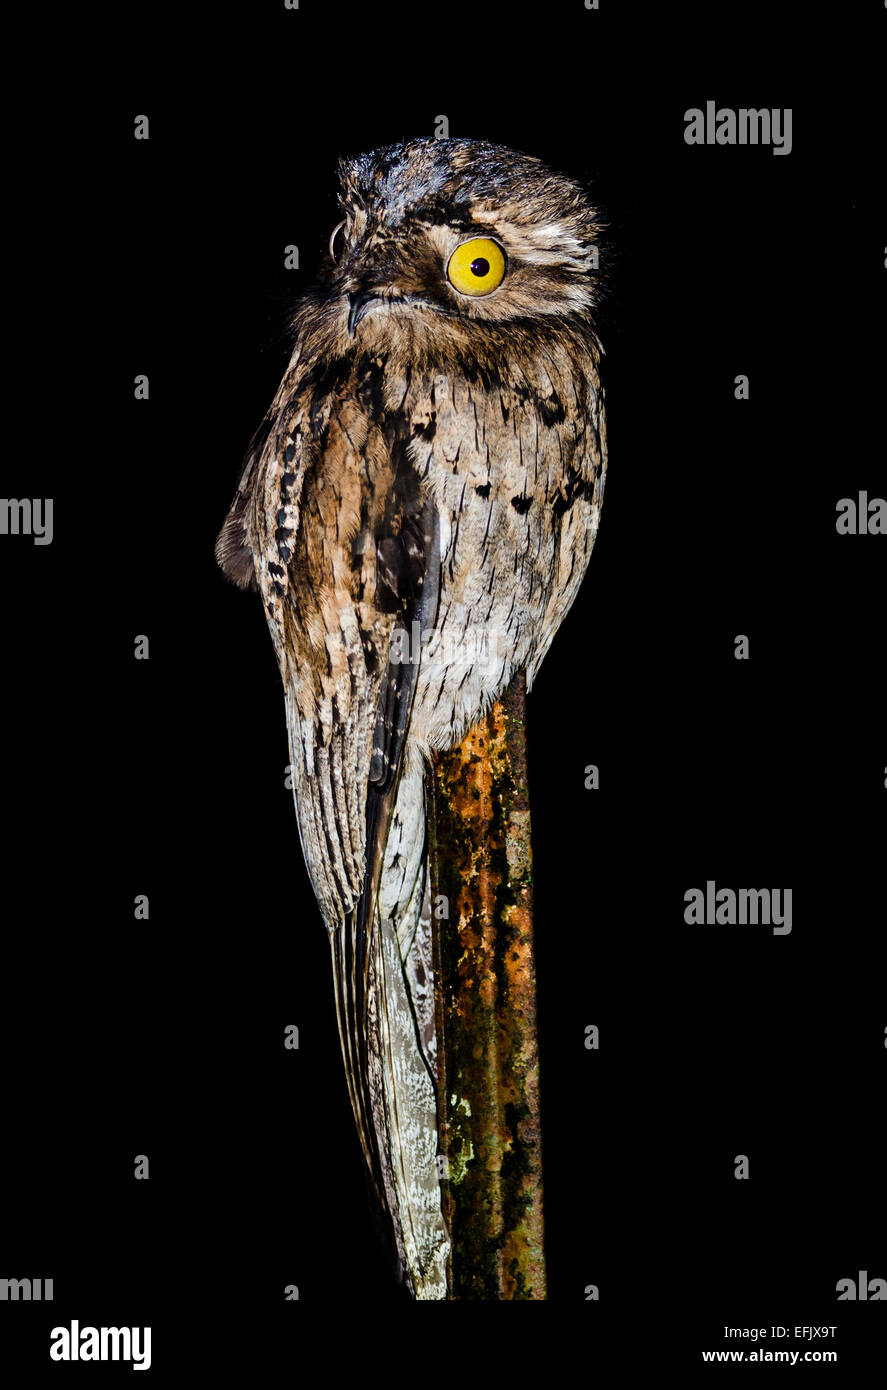 A Northern Potoo (Nyctibius jamaicensis) perched on a fence post at night. Belize, Central America. Stock Photo